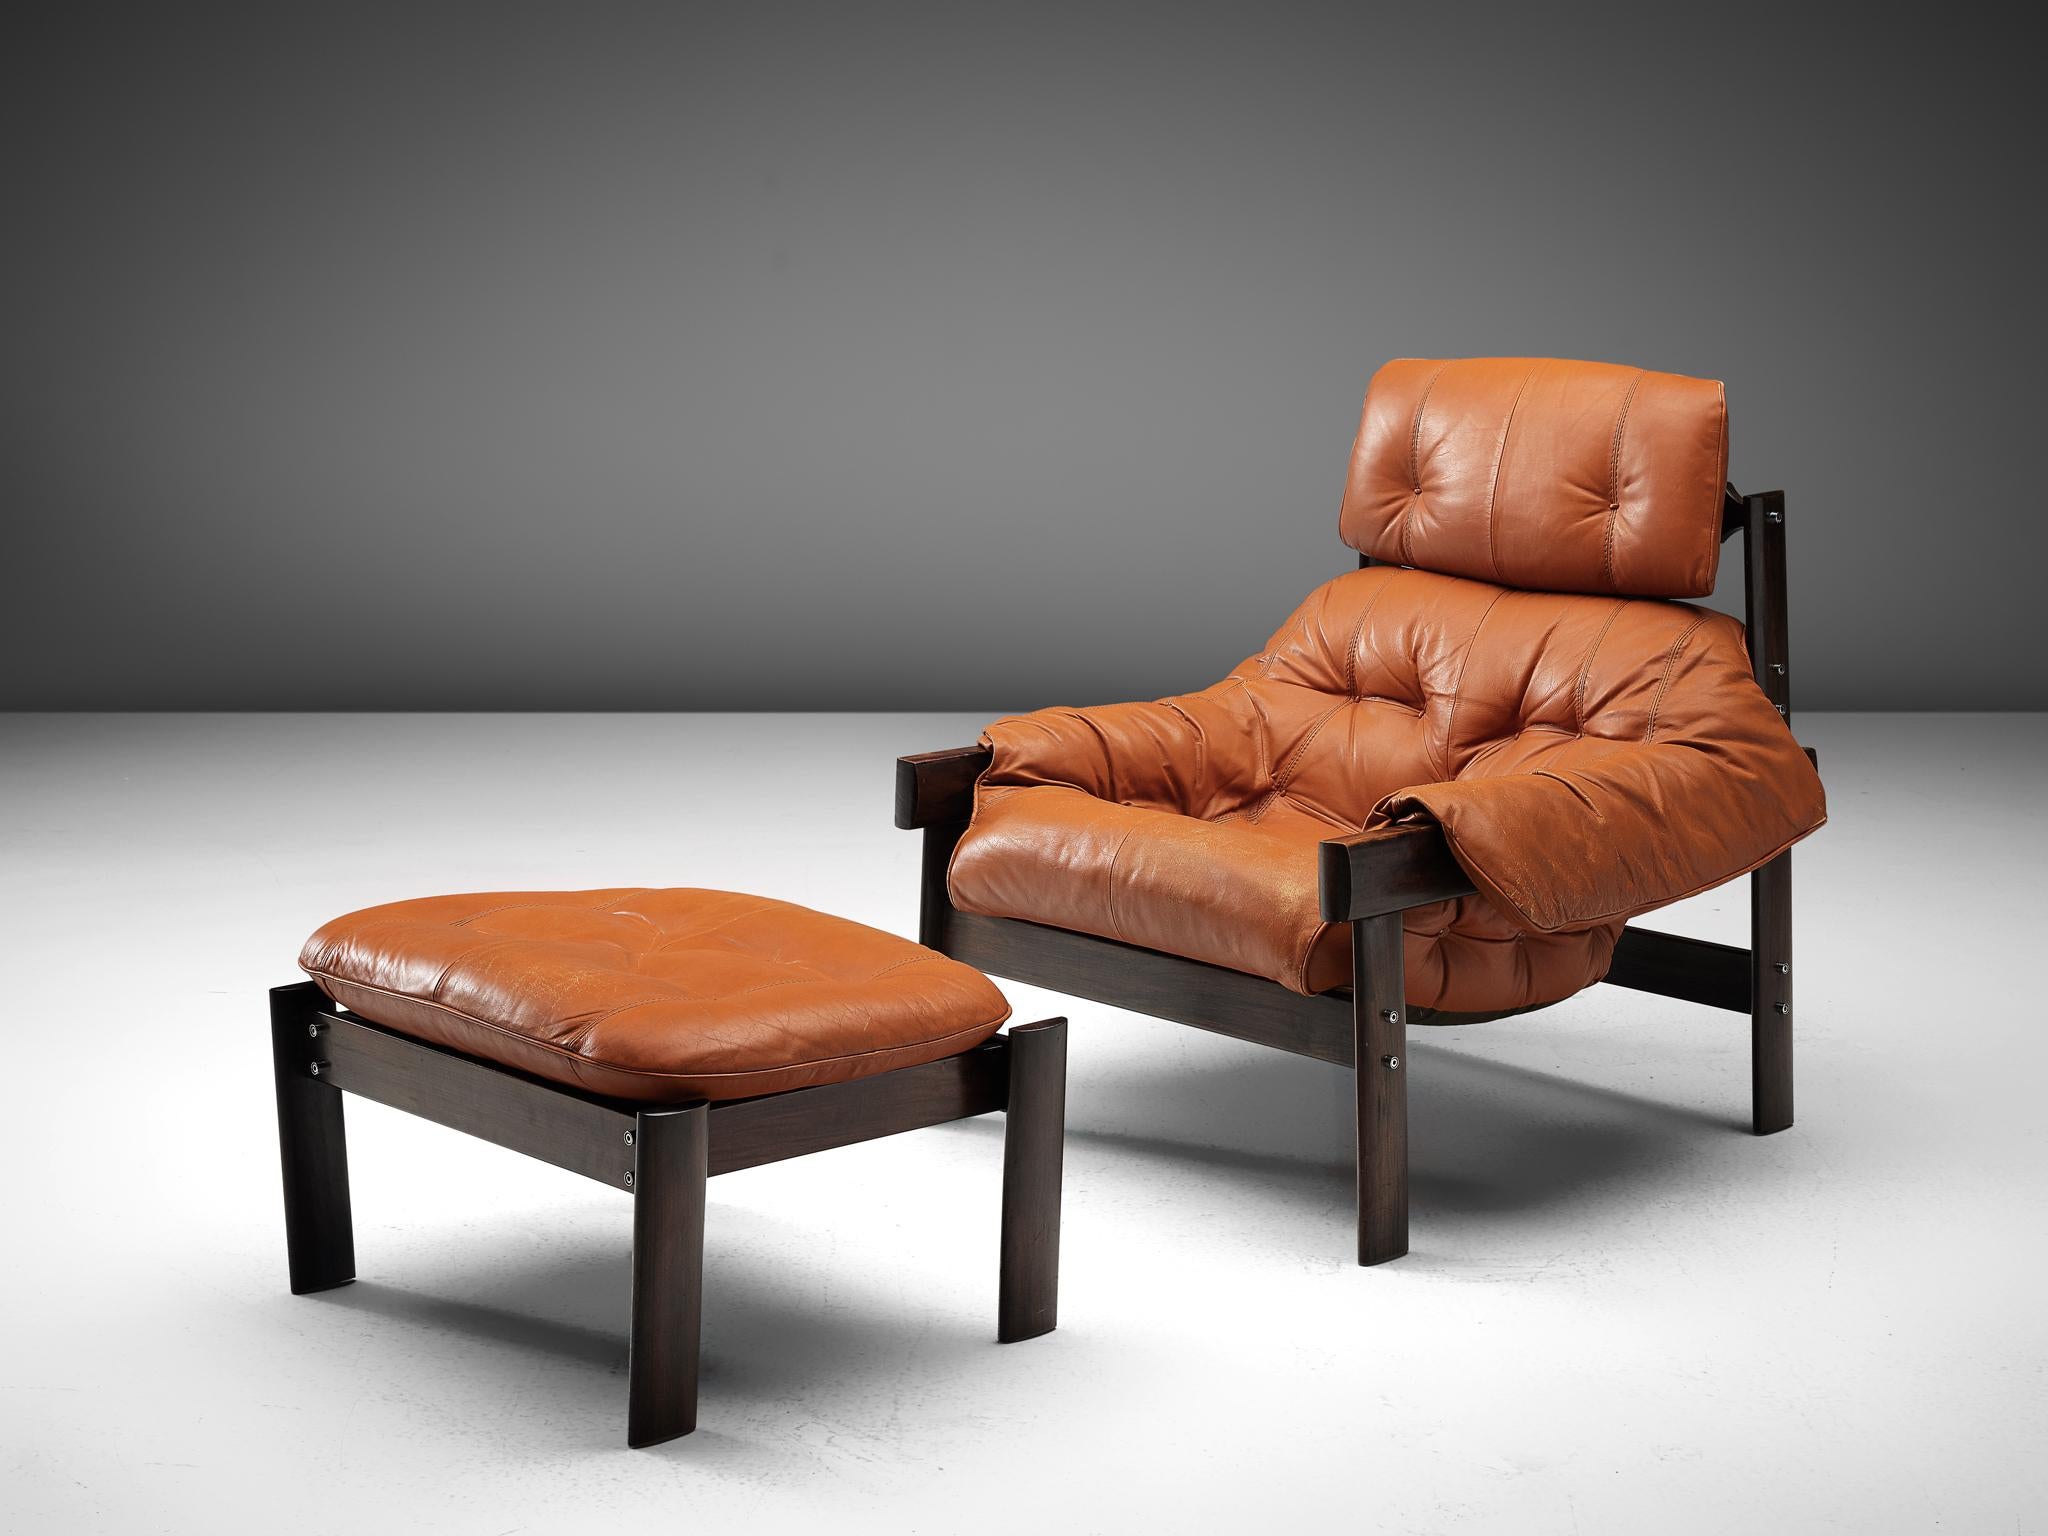 Percival Lafer, lounge chair with ottoman, leather, dark stained wood, Brazil, late 1970s

Bulky and voluptuous lounge chair with pouf by Brazilian designer Percival Lafer. This chair features a solid dark wooden base with leather straps spanned